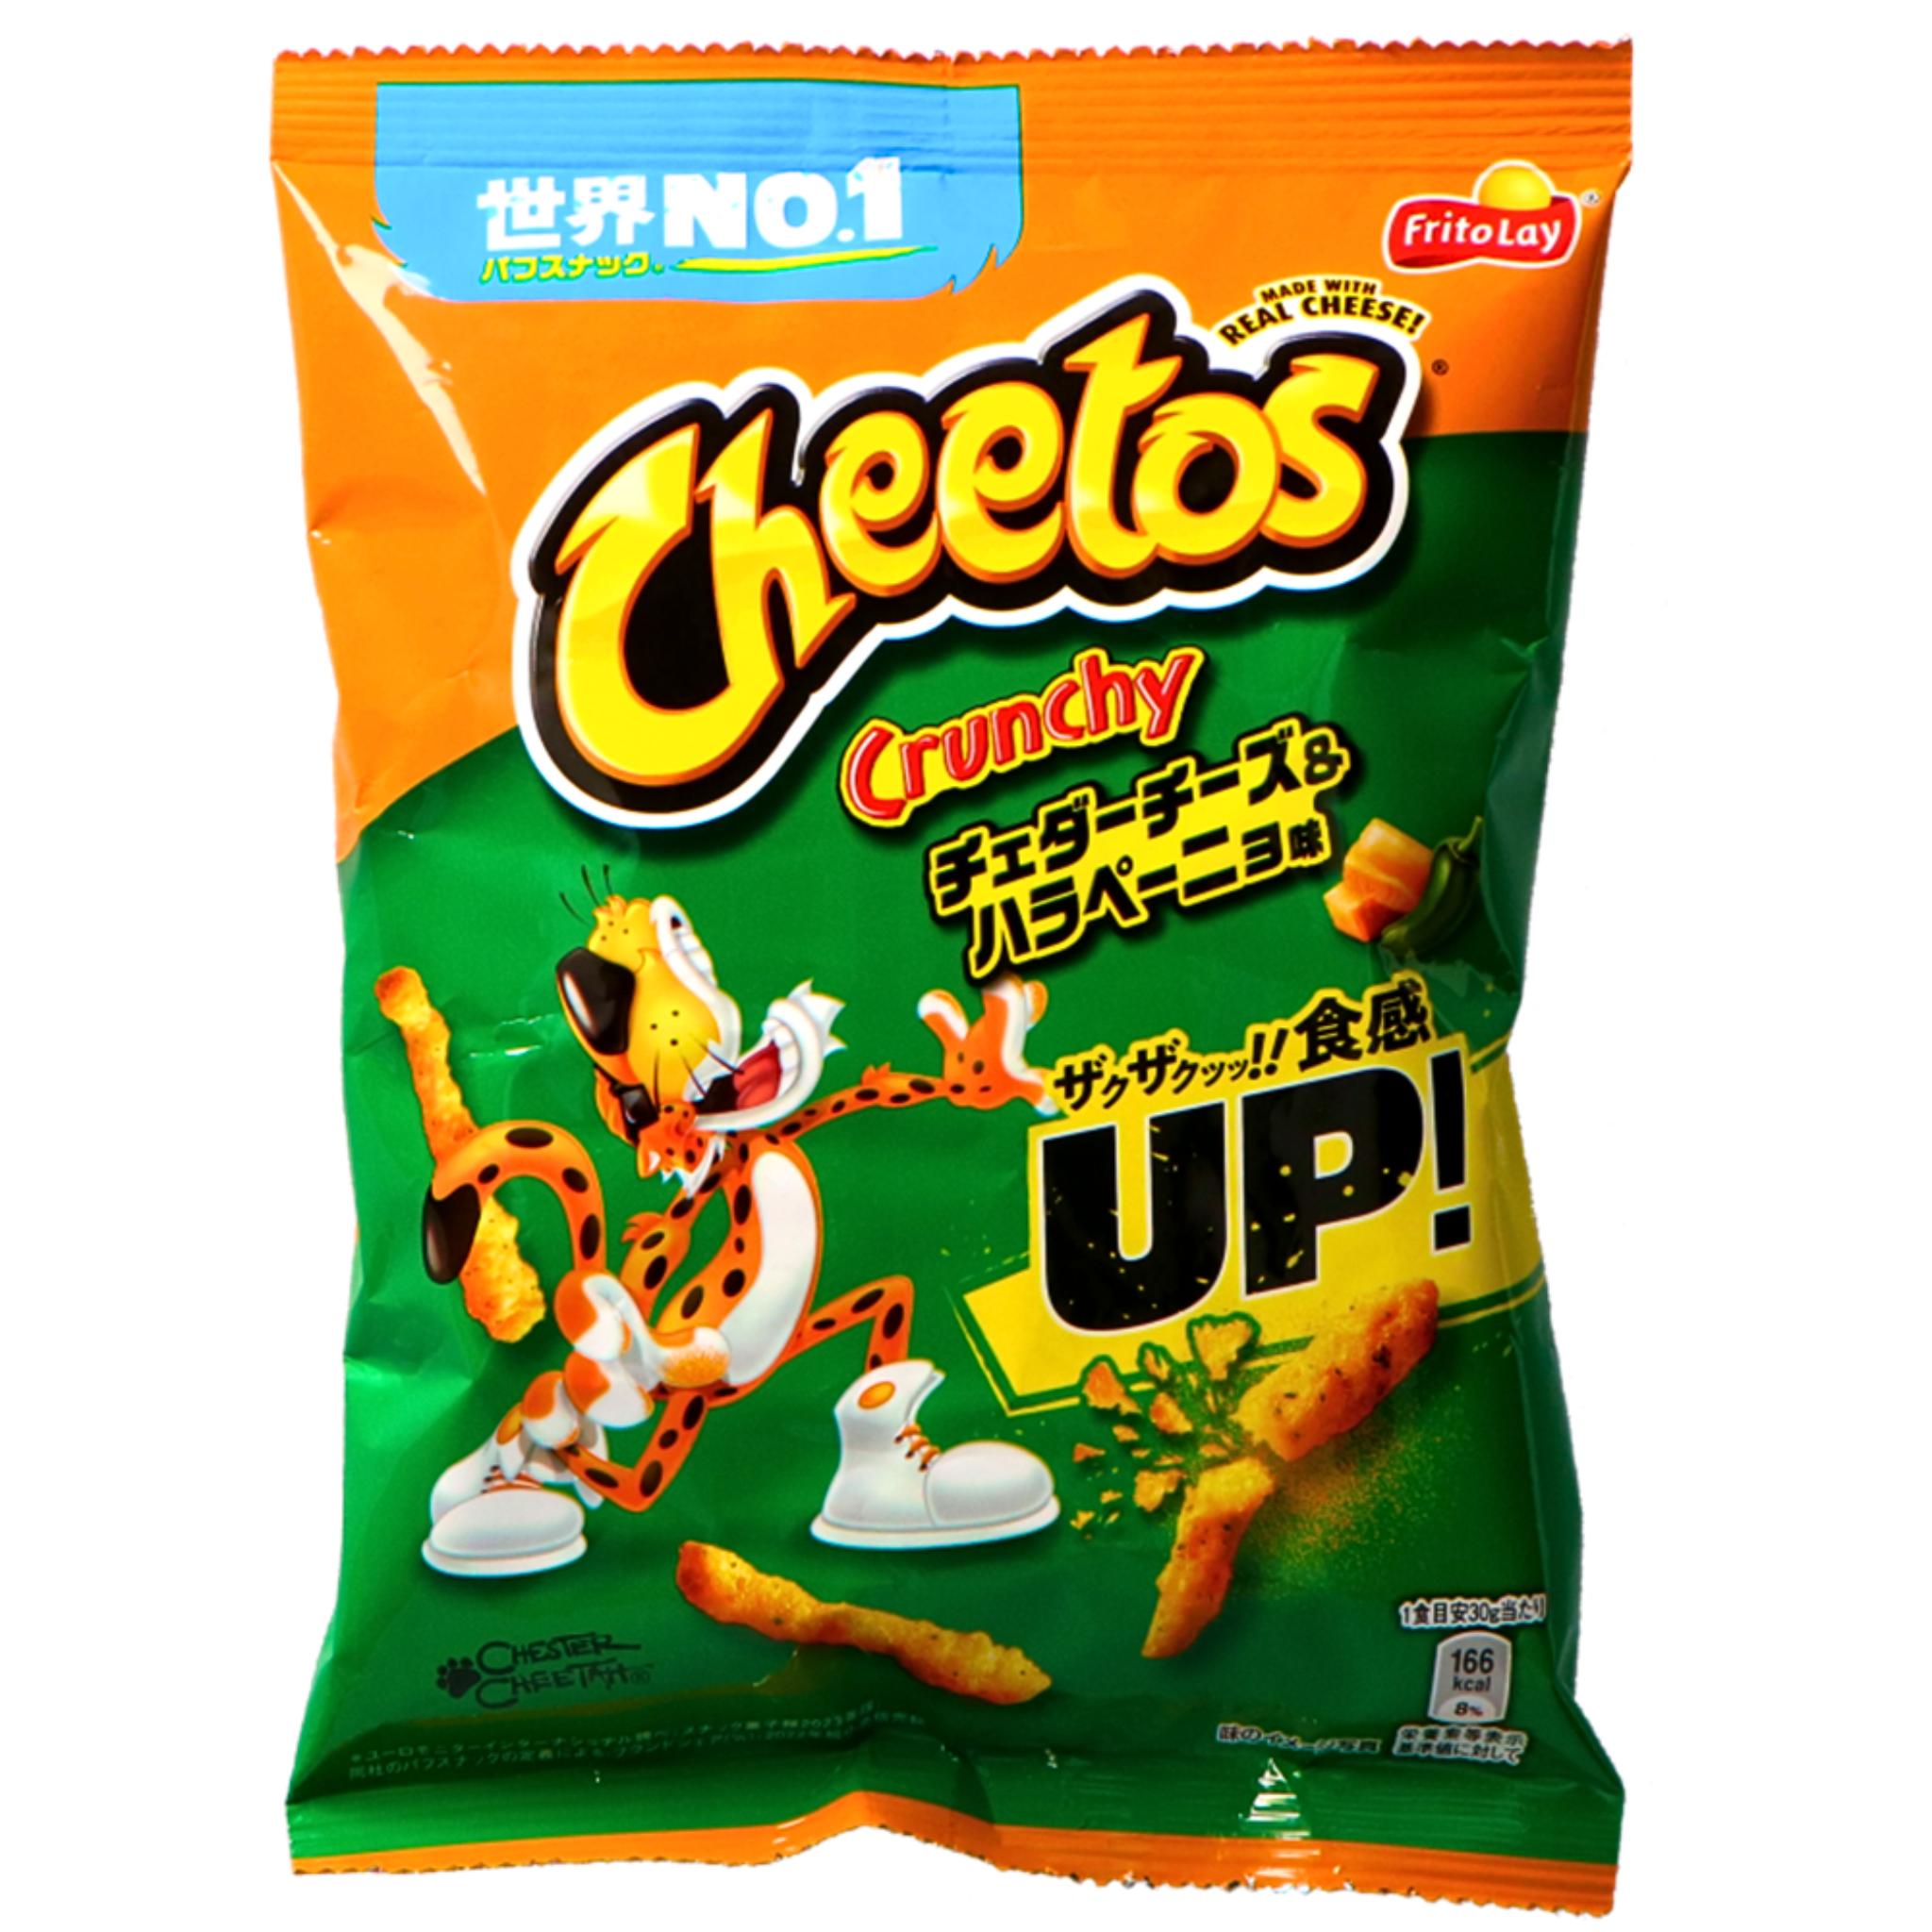 Cheetos Crunchy Cheddar Cheese & Jalapeno - 75g (JAPANS)